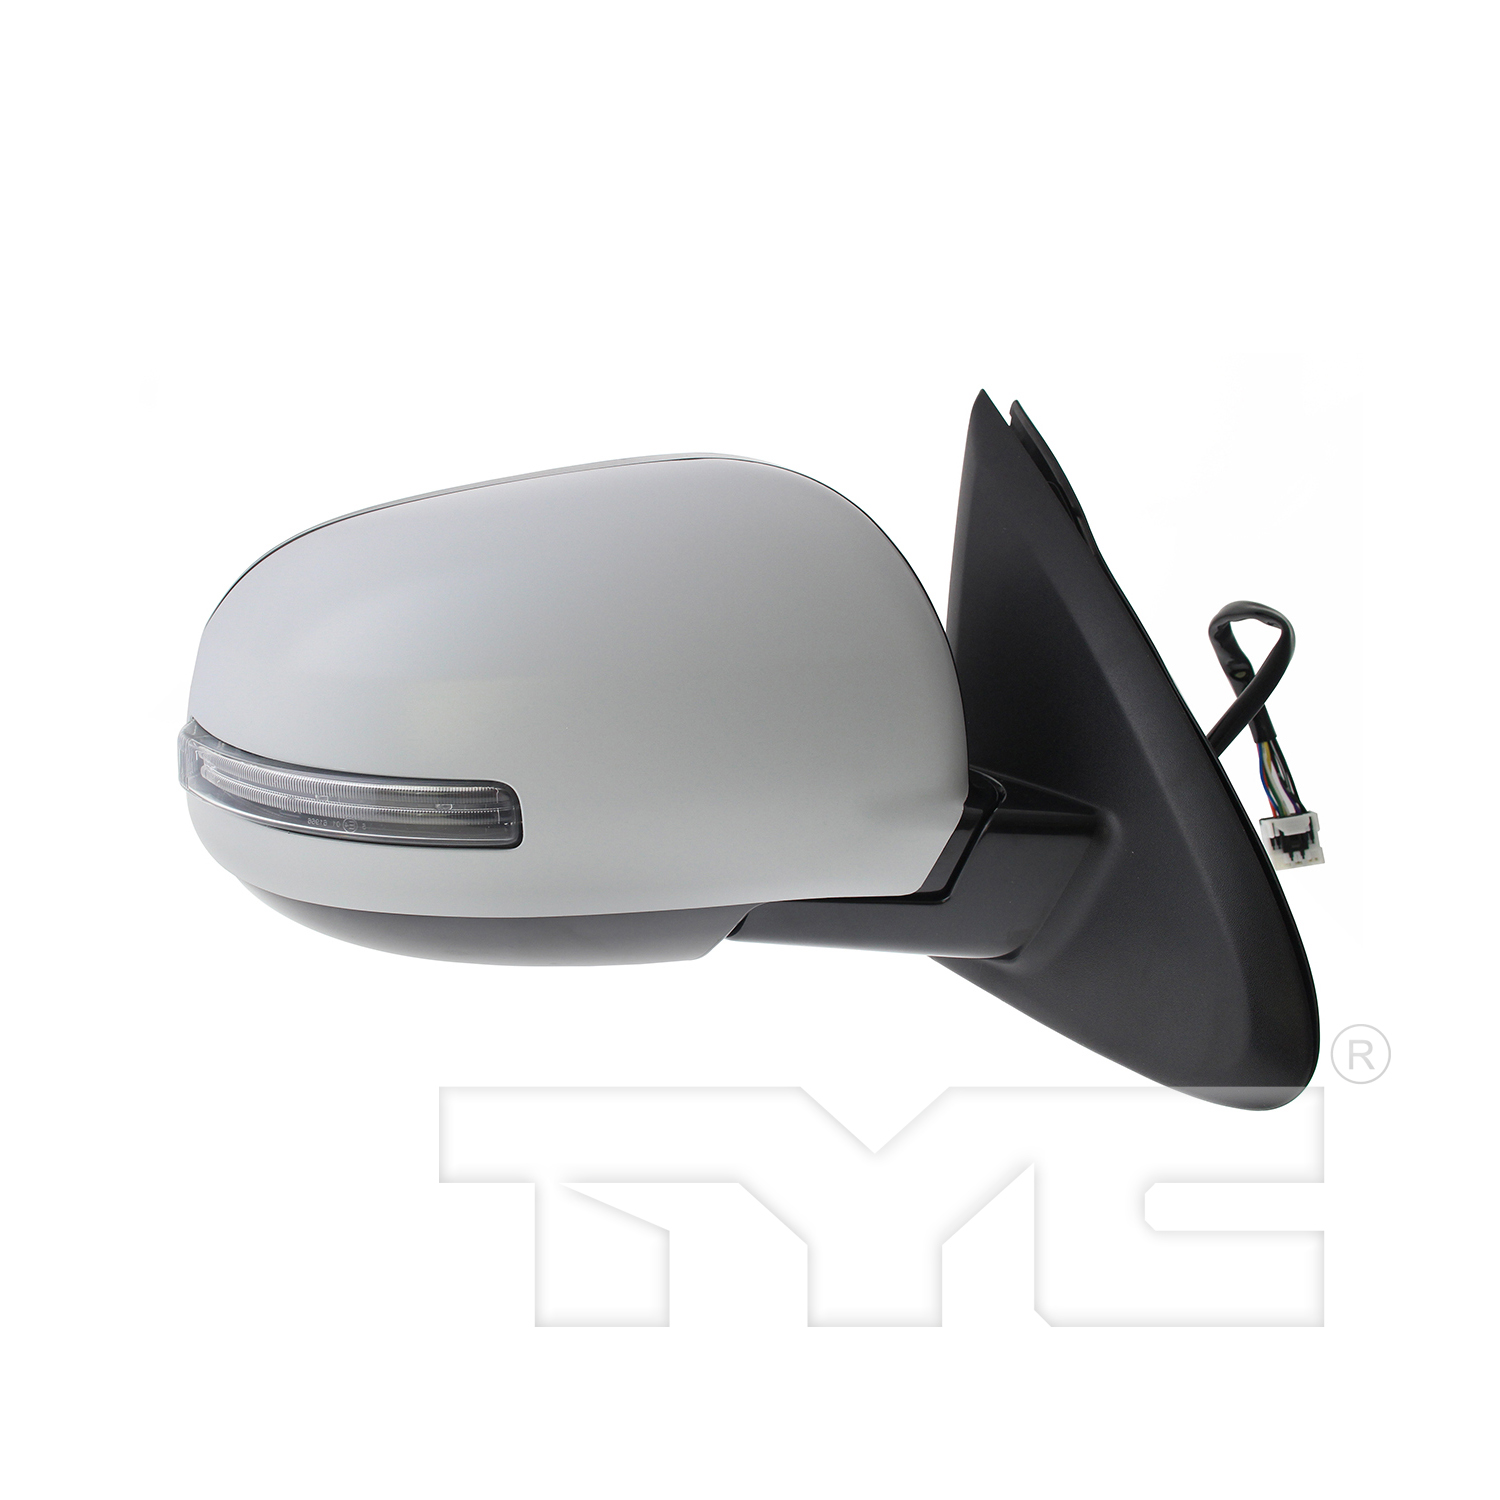 Aftermarket MIRRORS for MITSUBISHI - OUTLANDER, OUTLANDER,16-17,RT Mirror outside rear view